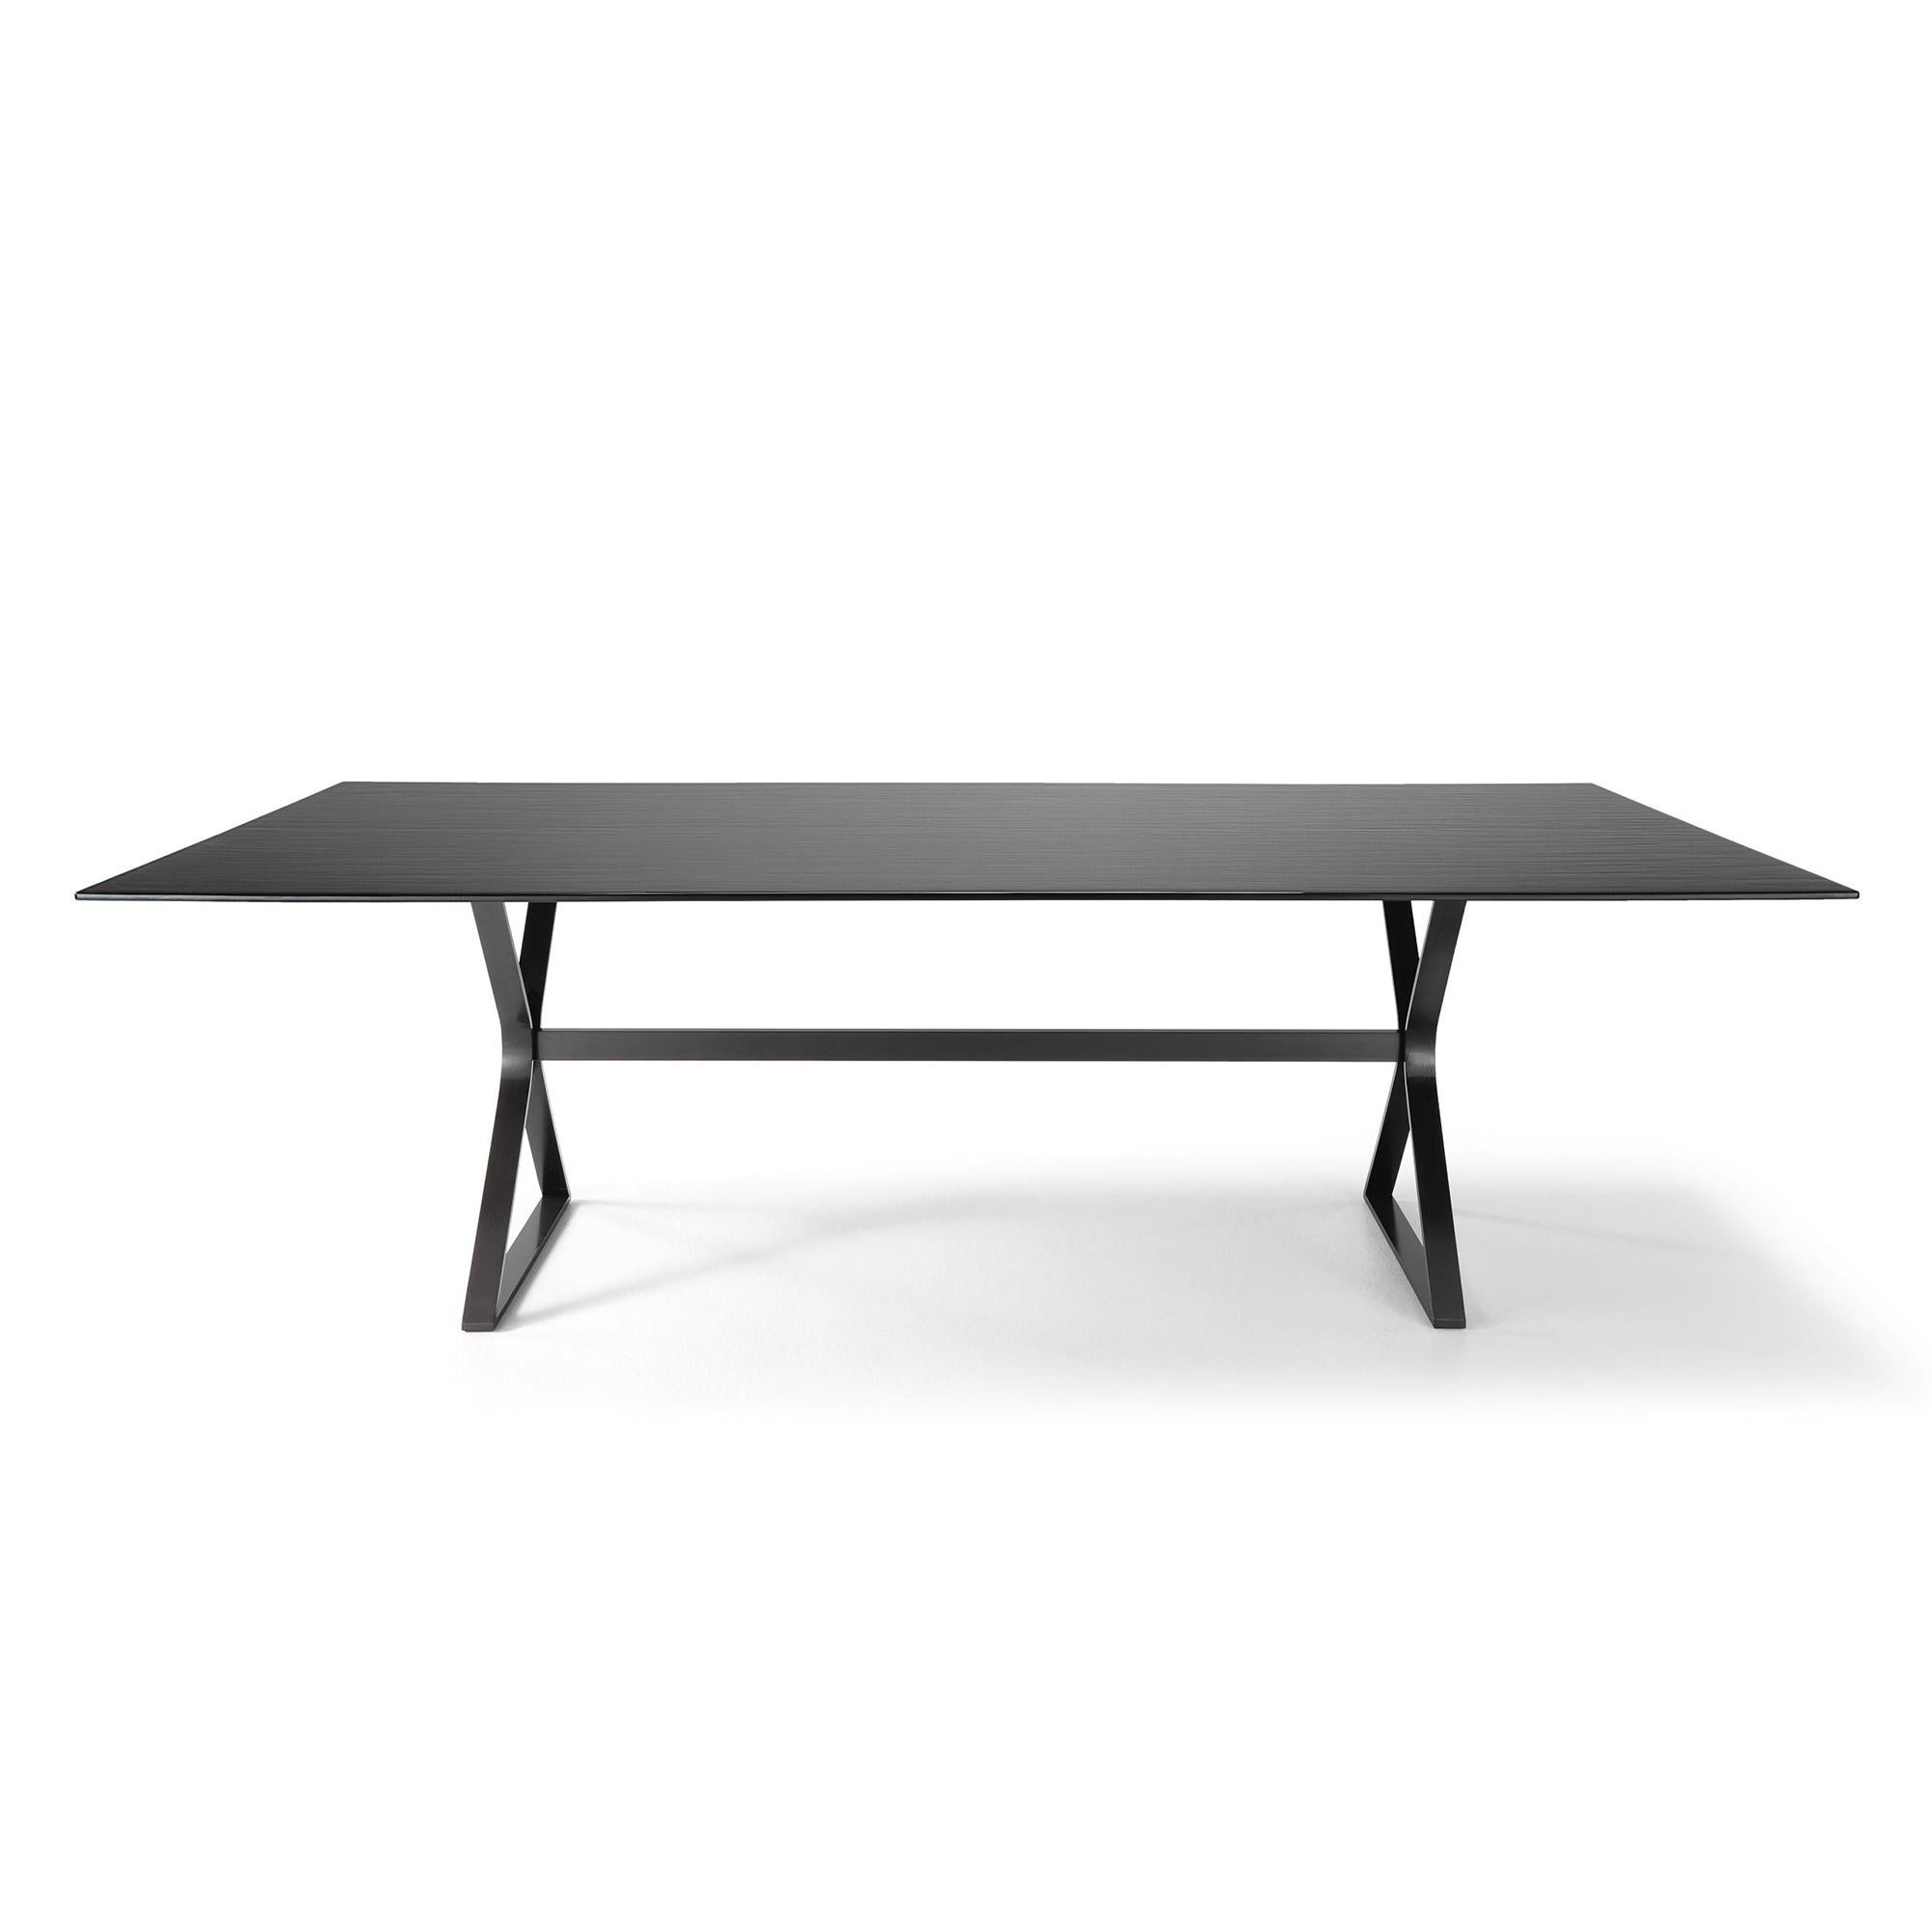 Dining table lines top with metal shades dark grey tinted 
top, in melted glass in 12mm thickness. With a forged metal 
base in dark grey finish.
Available in:
L 200 x D 100 x H 75cm, price: 5400,00€. or in
L 240 x D 110 x H 75cm, price: